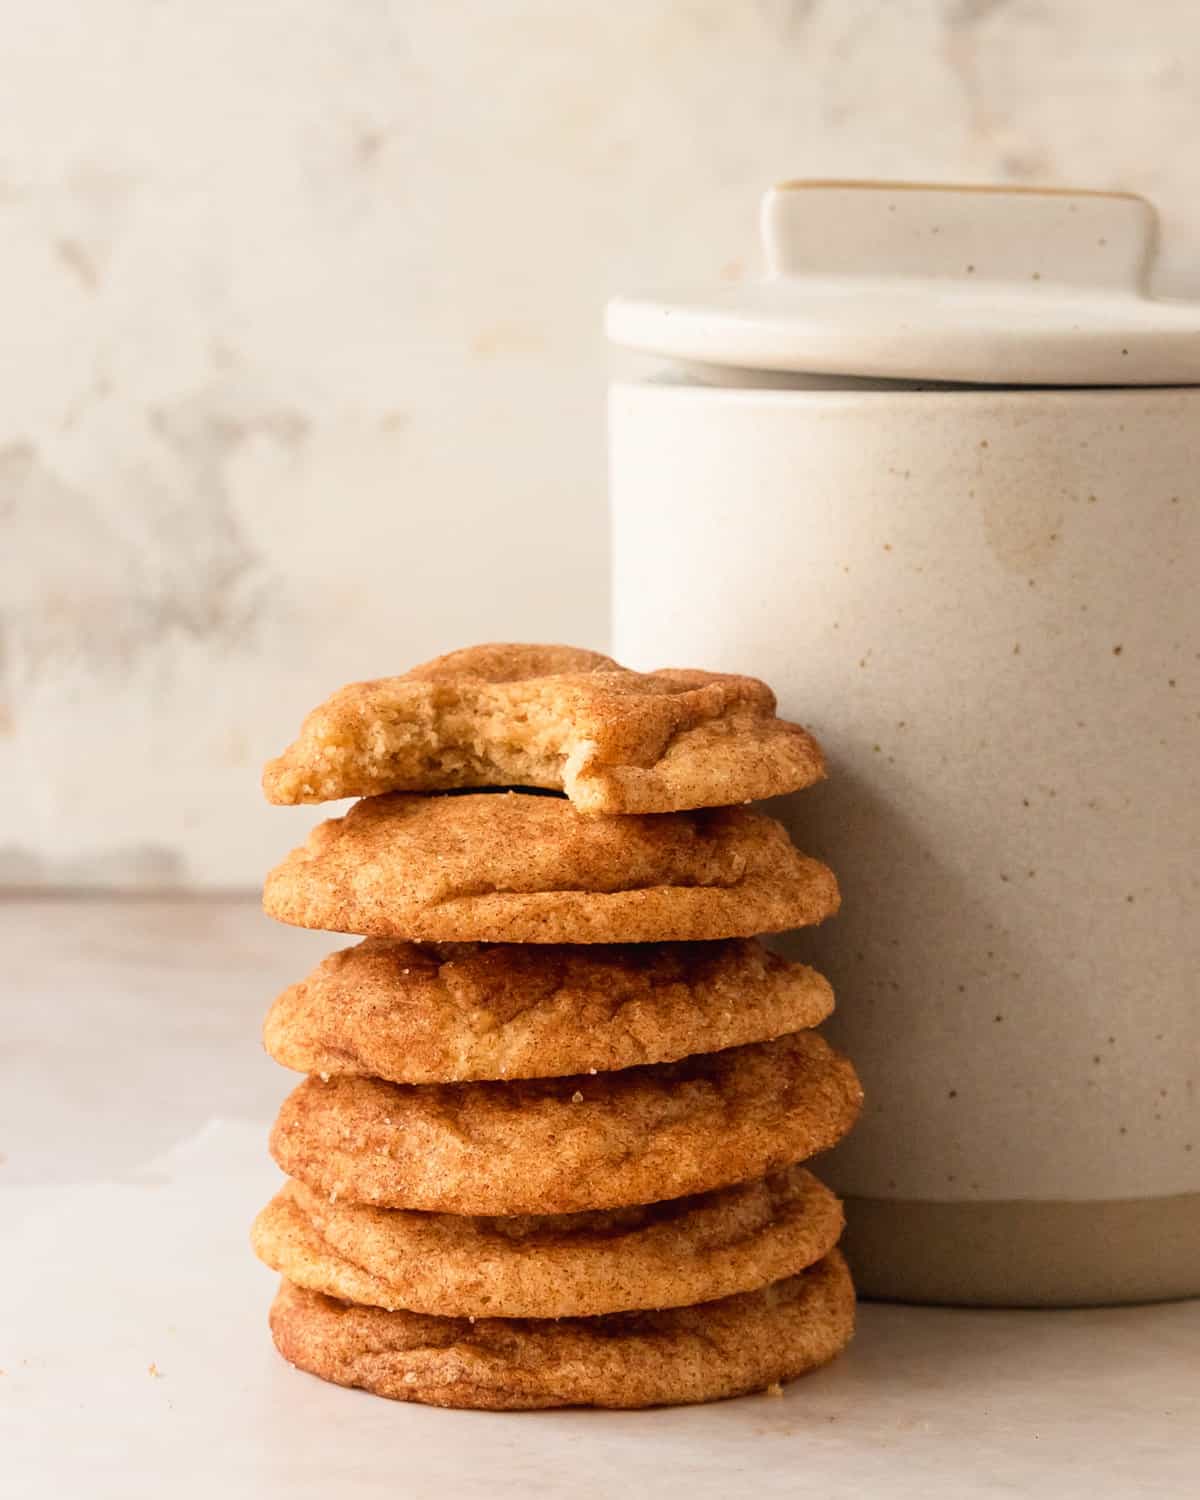 Snickerdoodles in a stack with one on top that has a bite taken out.